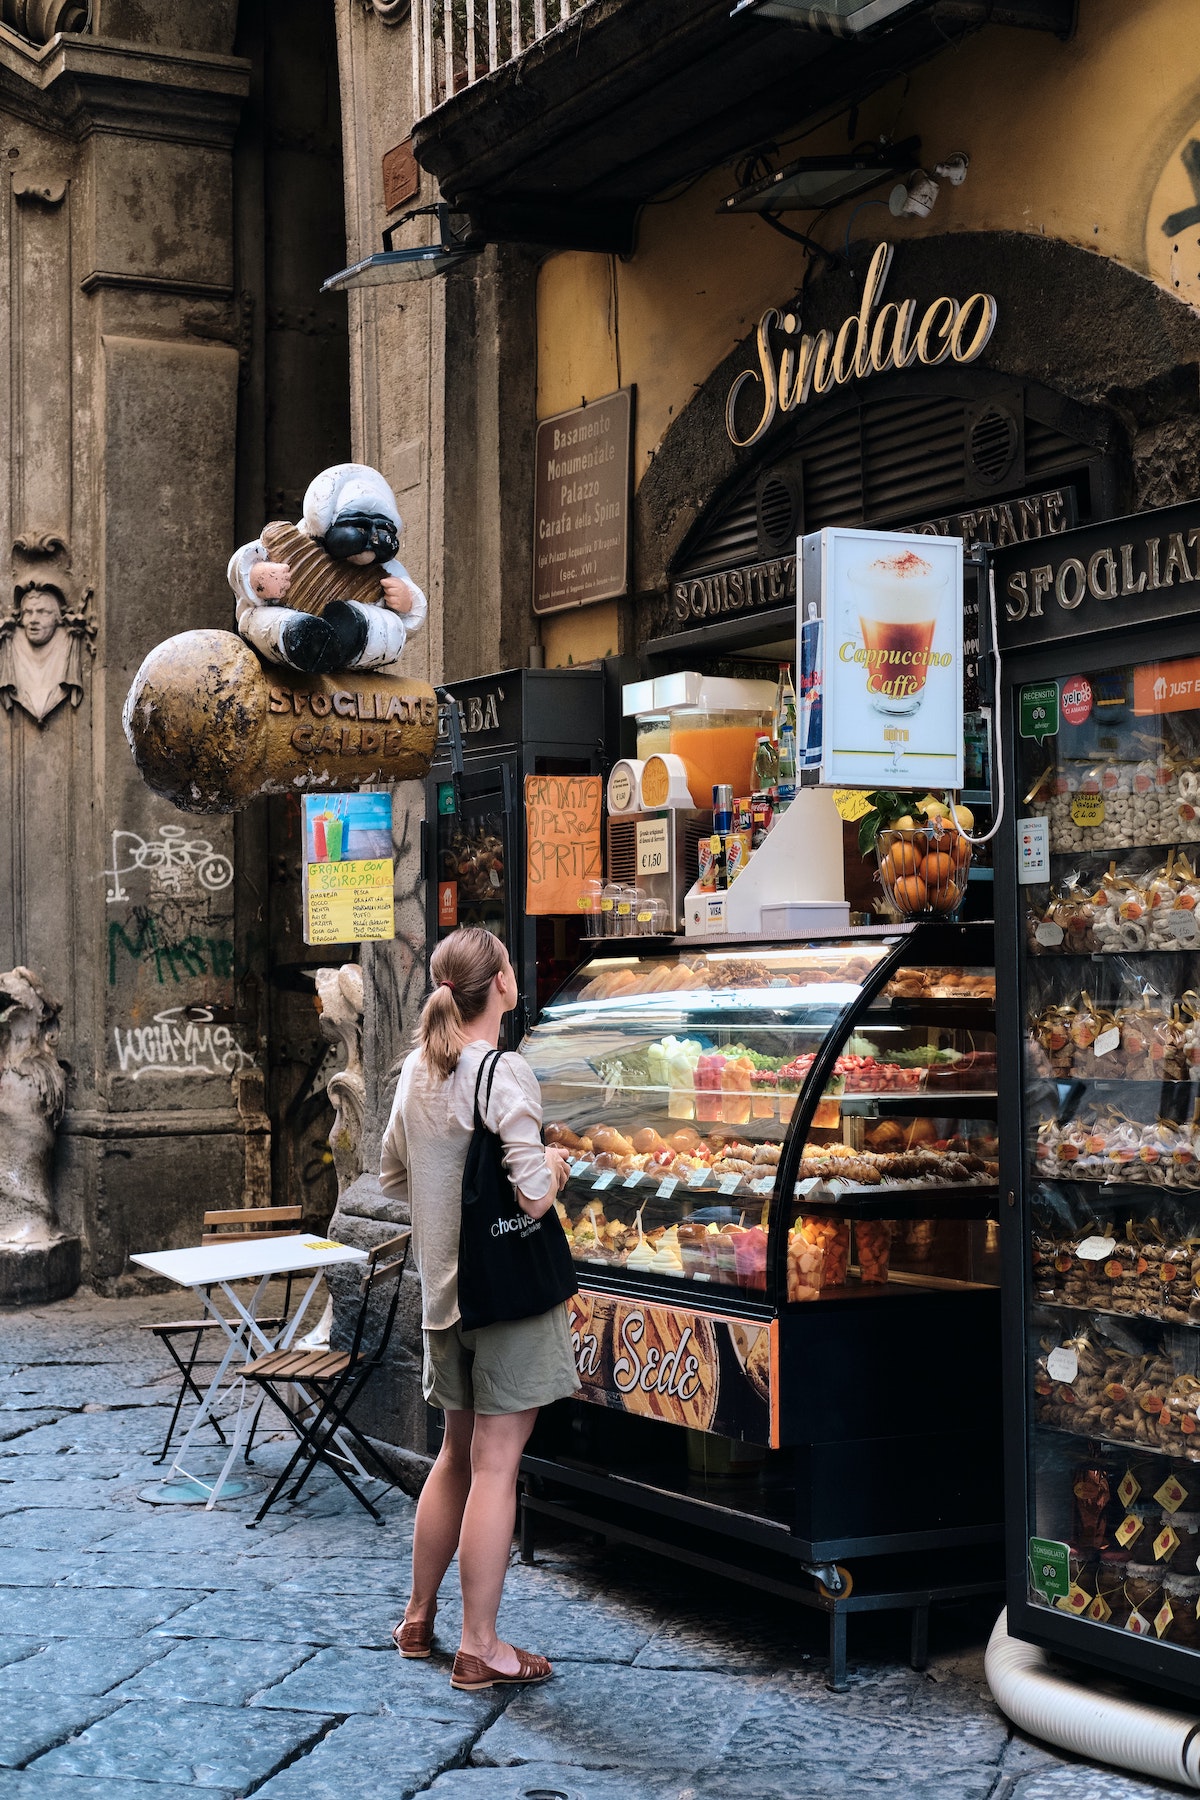 A woman stands on the street and looks inside a bakery display case in Naples, Italy.